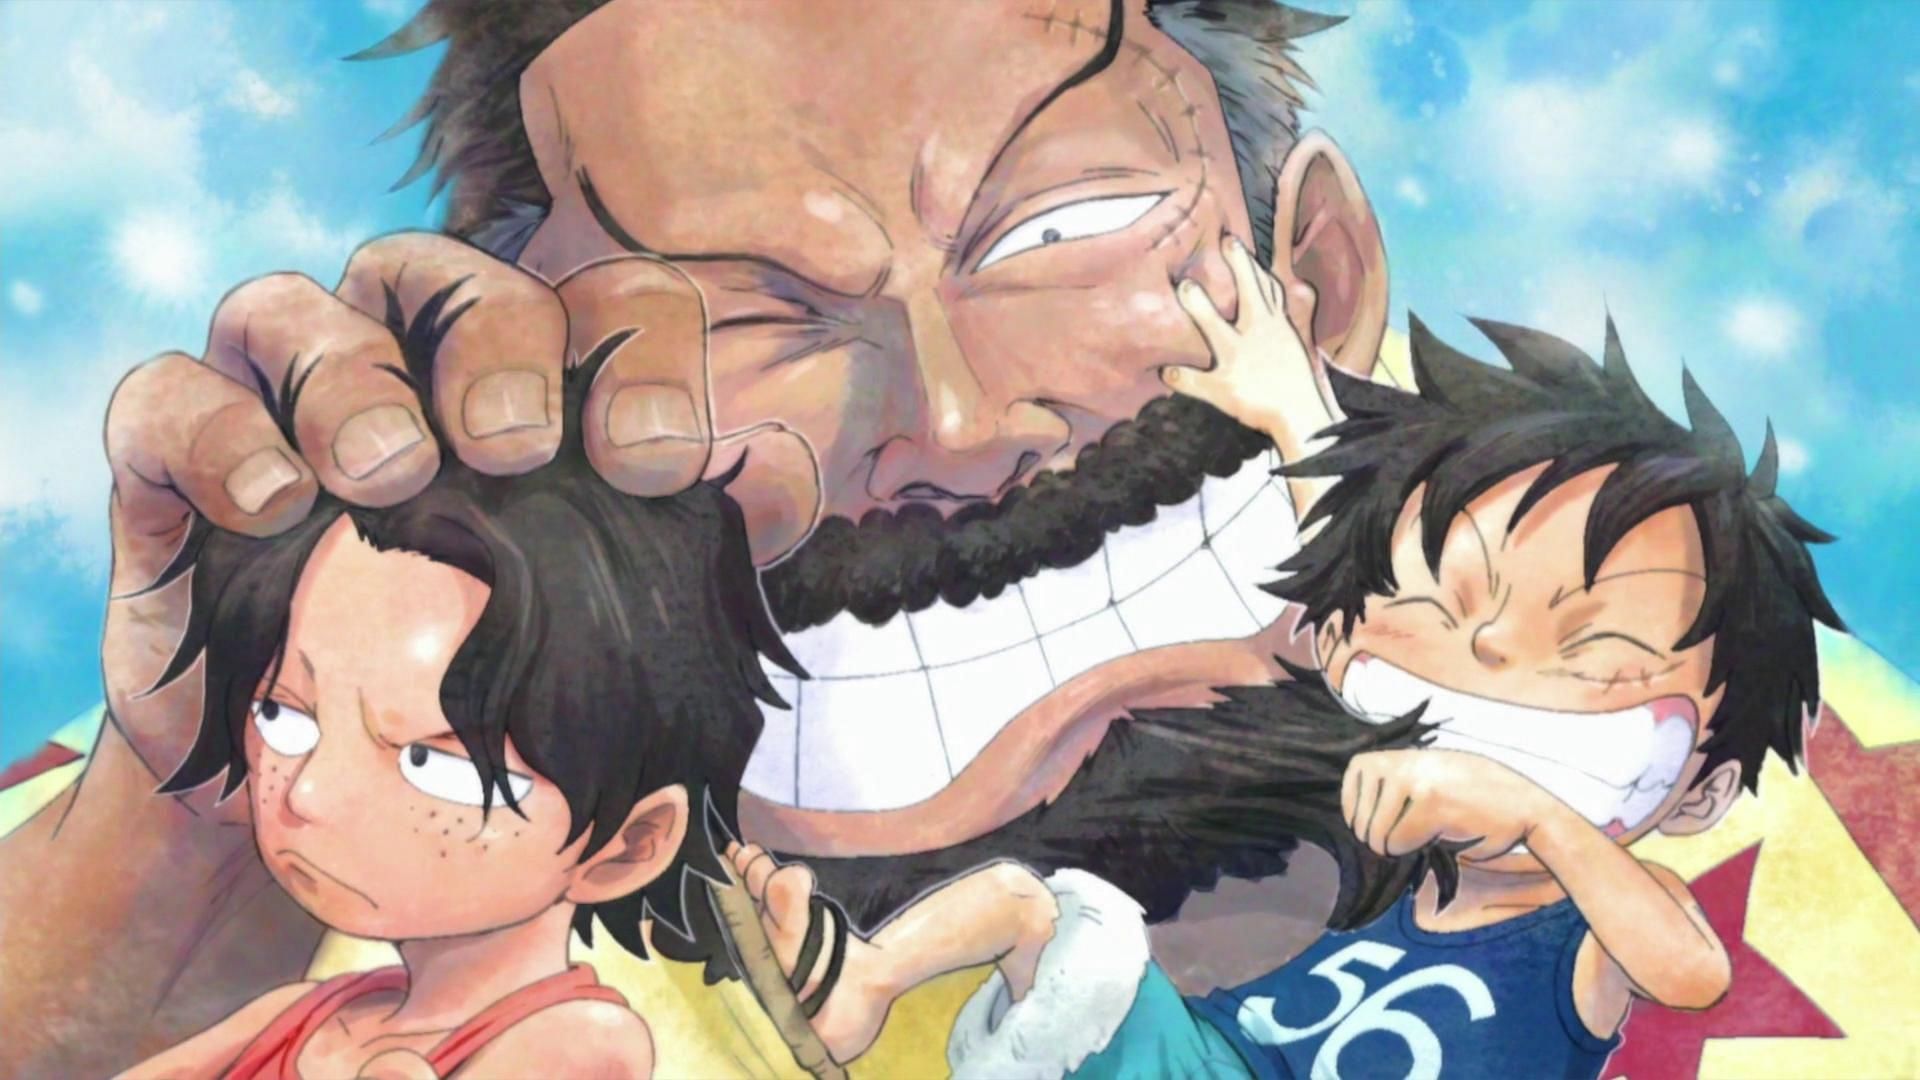 Garp amiably playing with Ace and Luffy (Image via Toei Animation, One Piece)